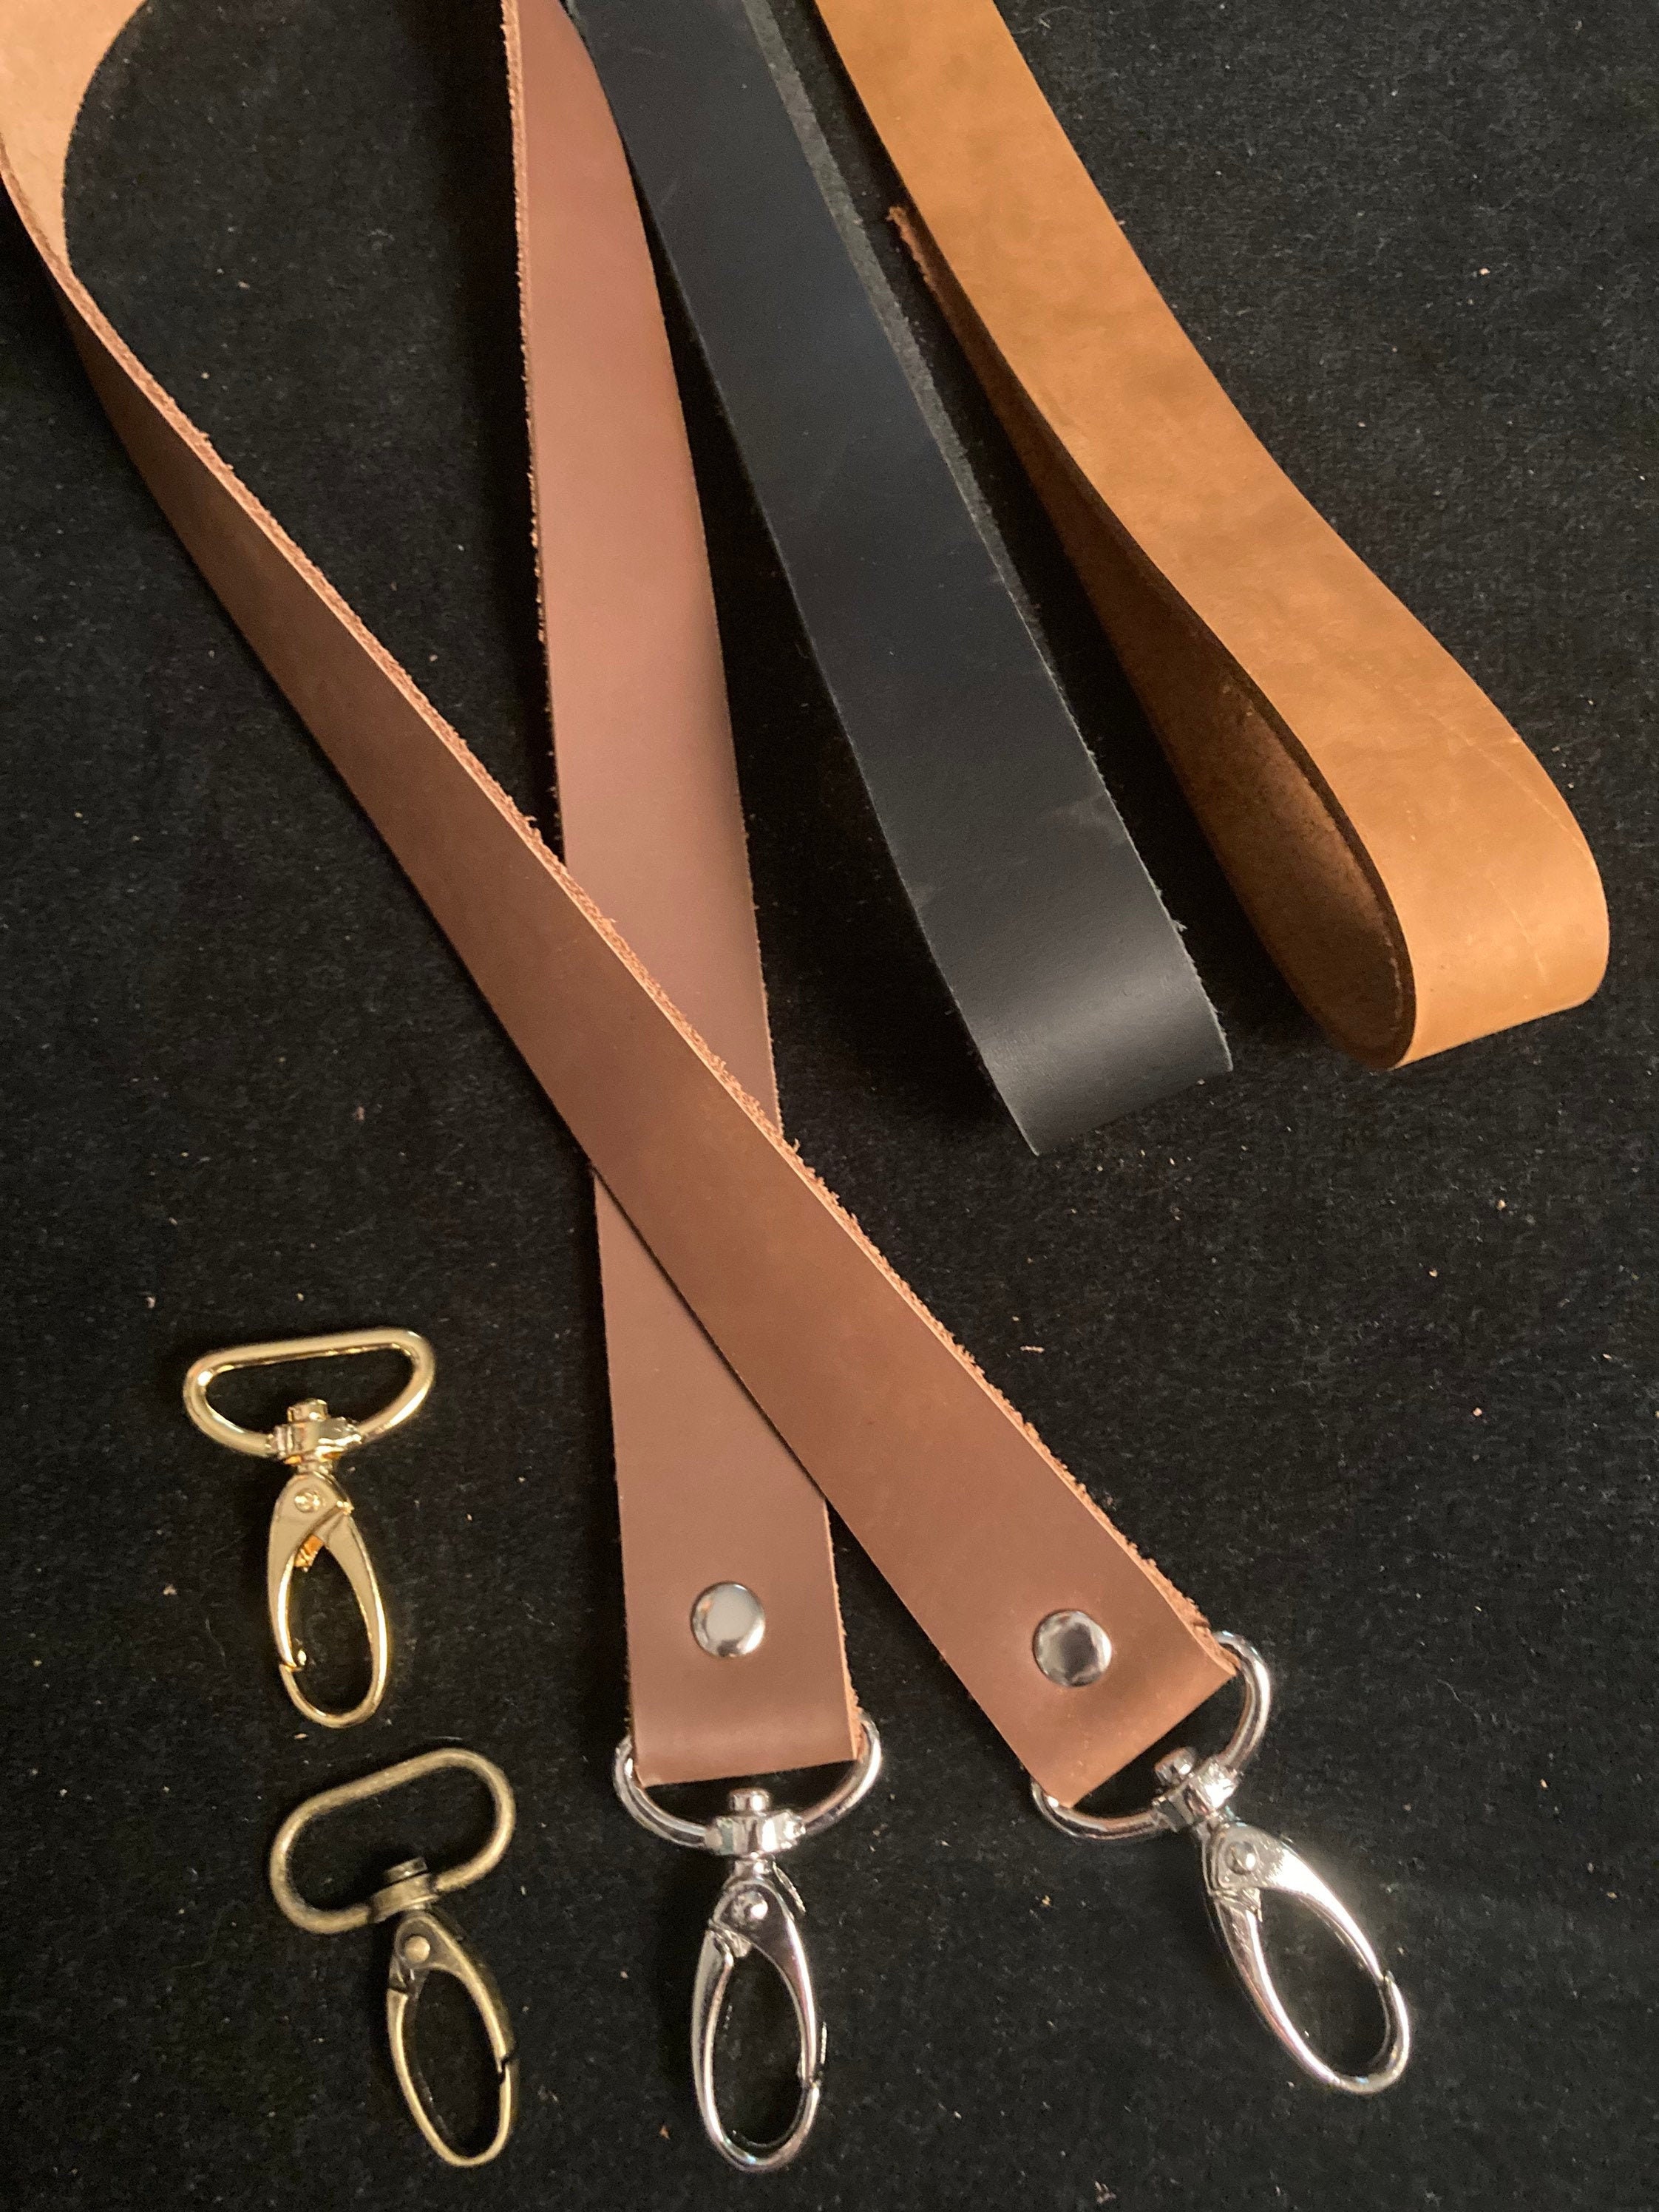 Replacement Purse Straps, Genuine Leather, 1 Inch Wide. Brown